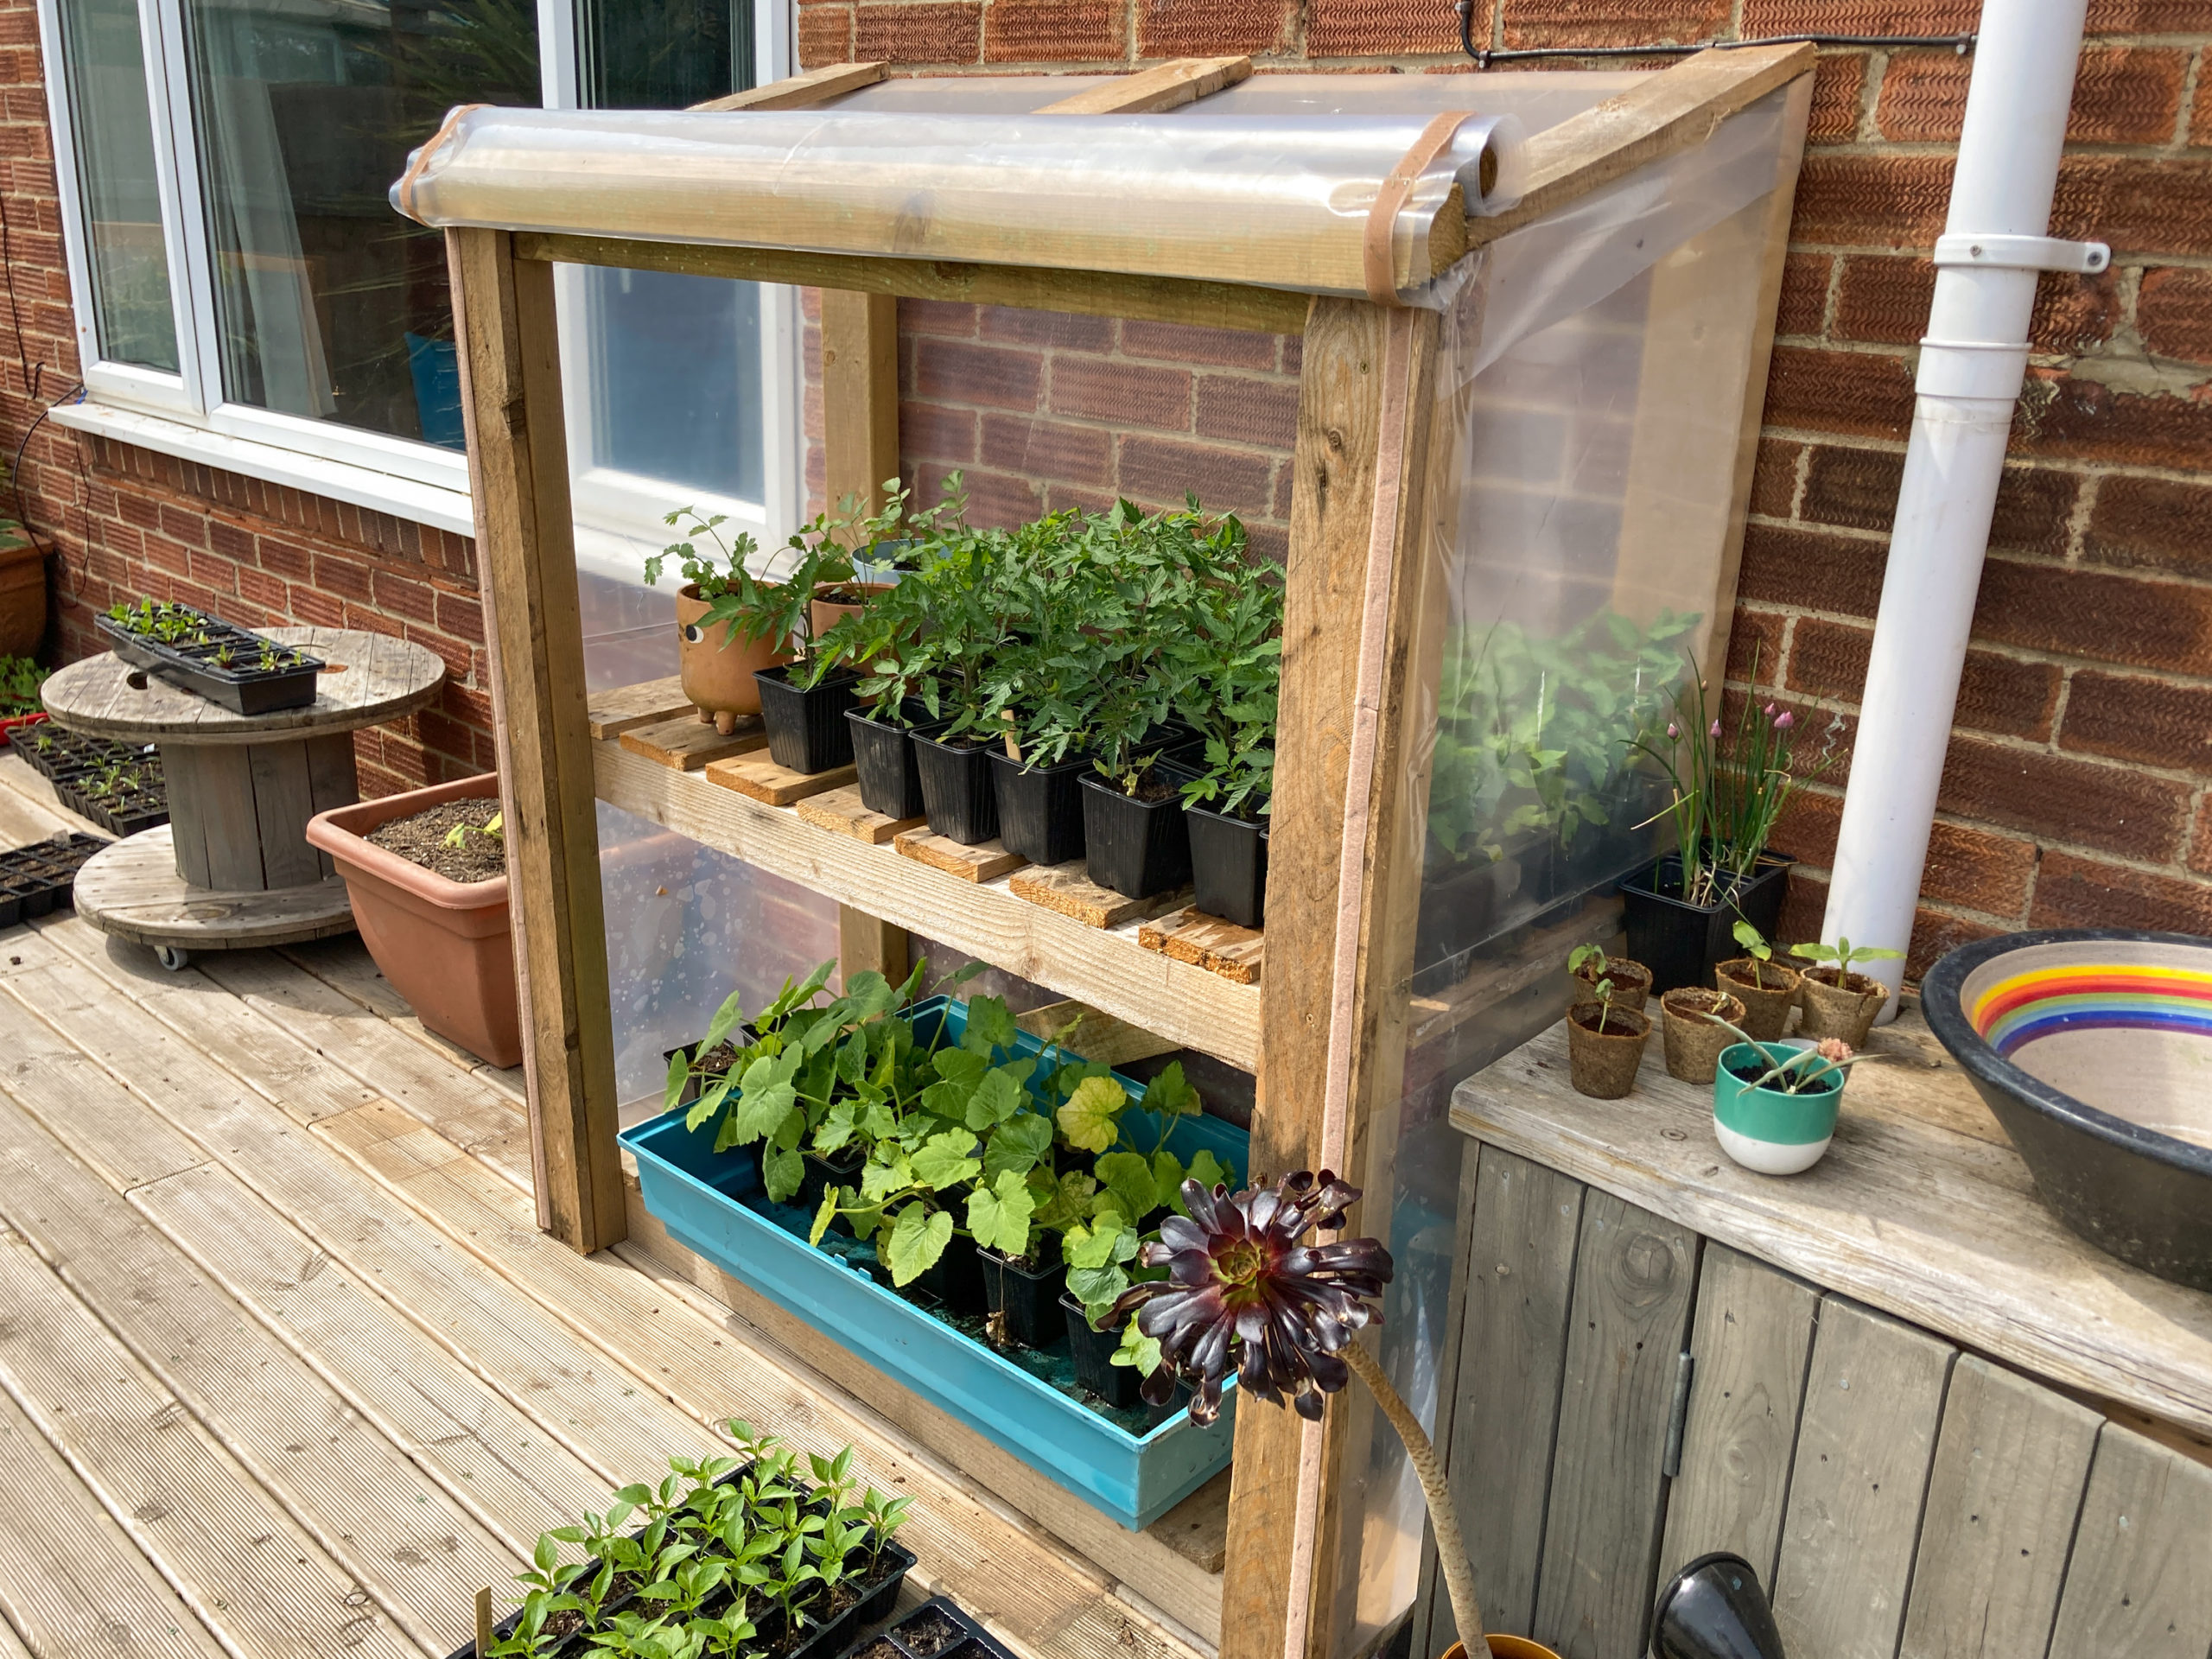 How to build a simple greenhouse